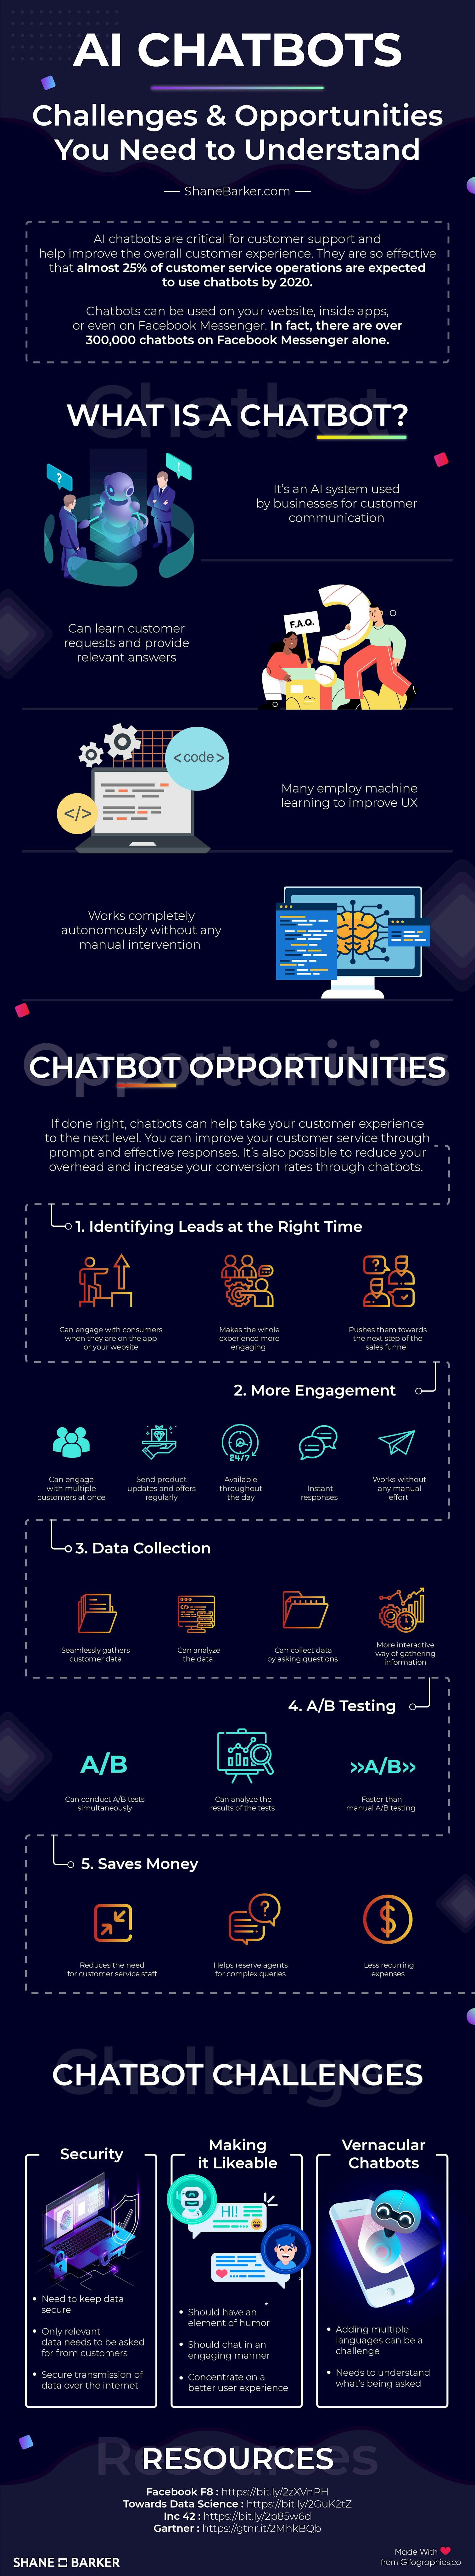 AI Chatbots Challenges and Opportunities You Need to Understand